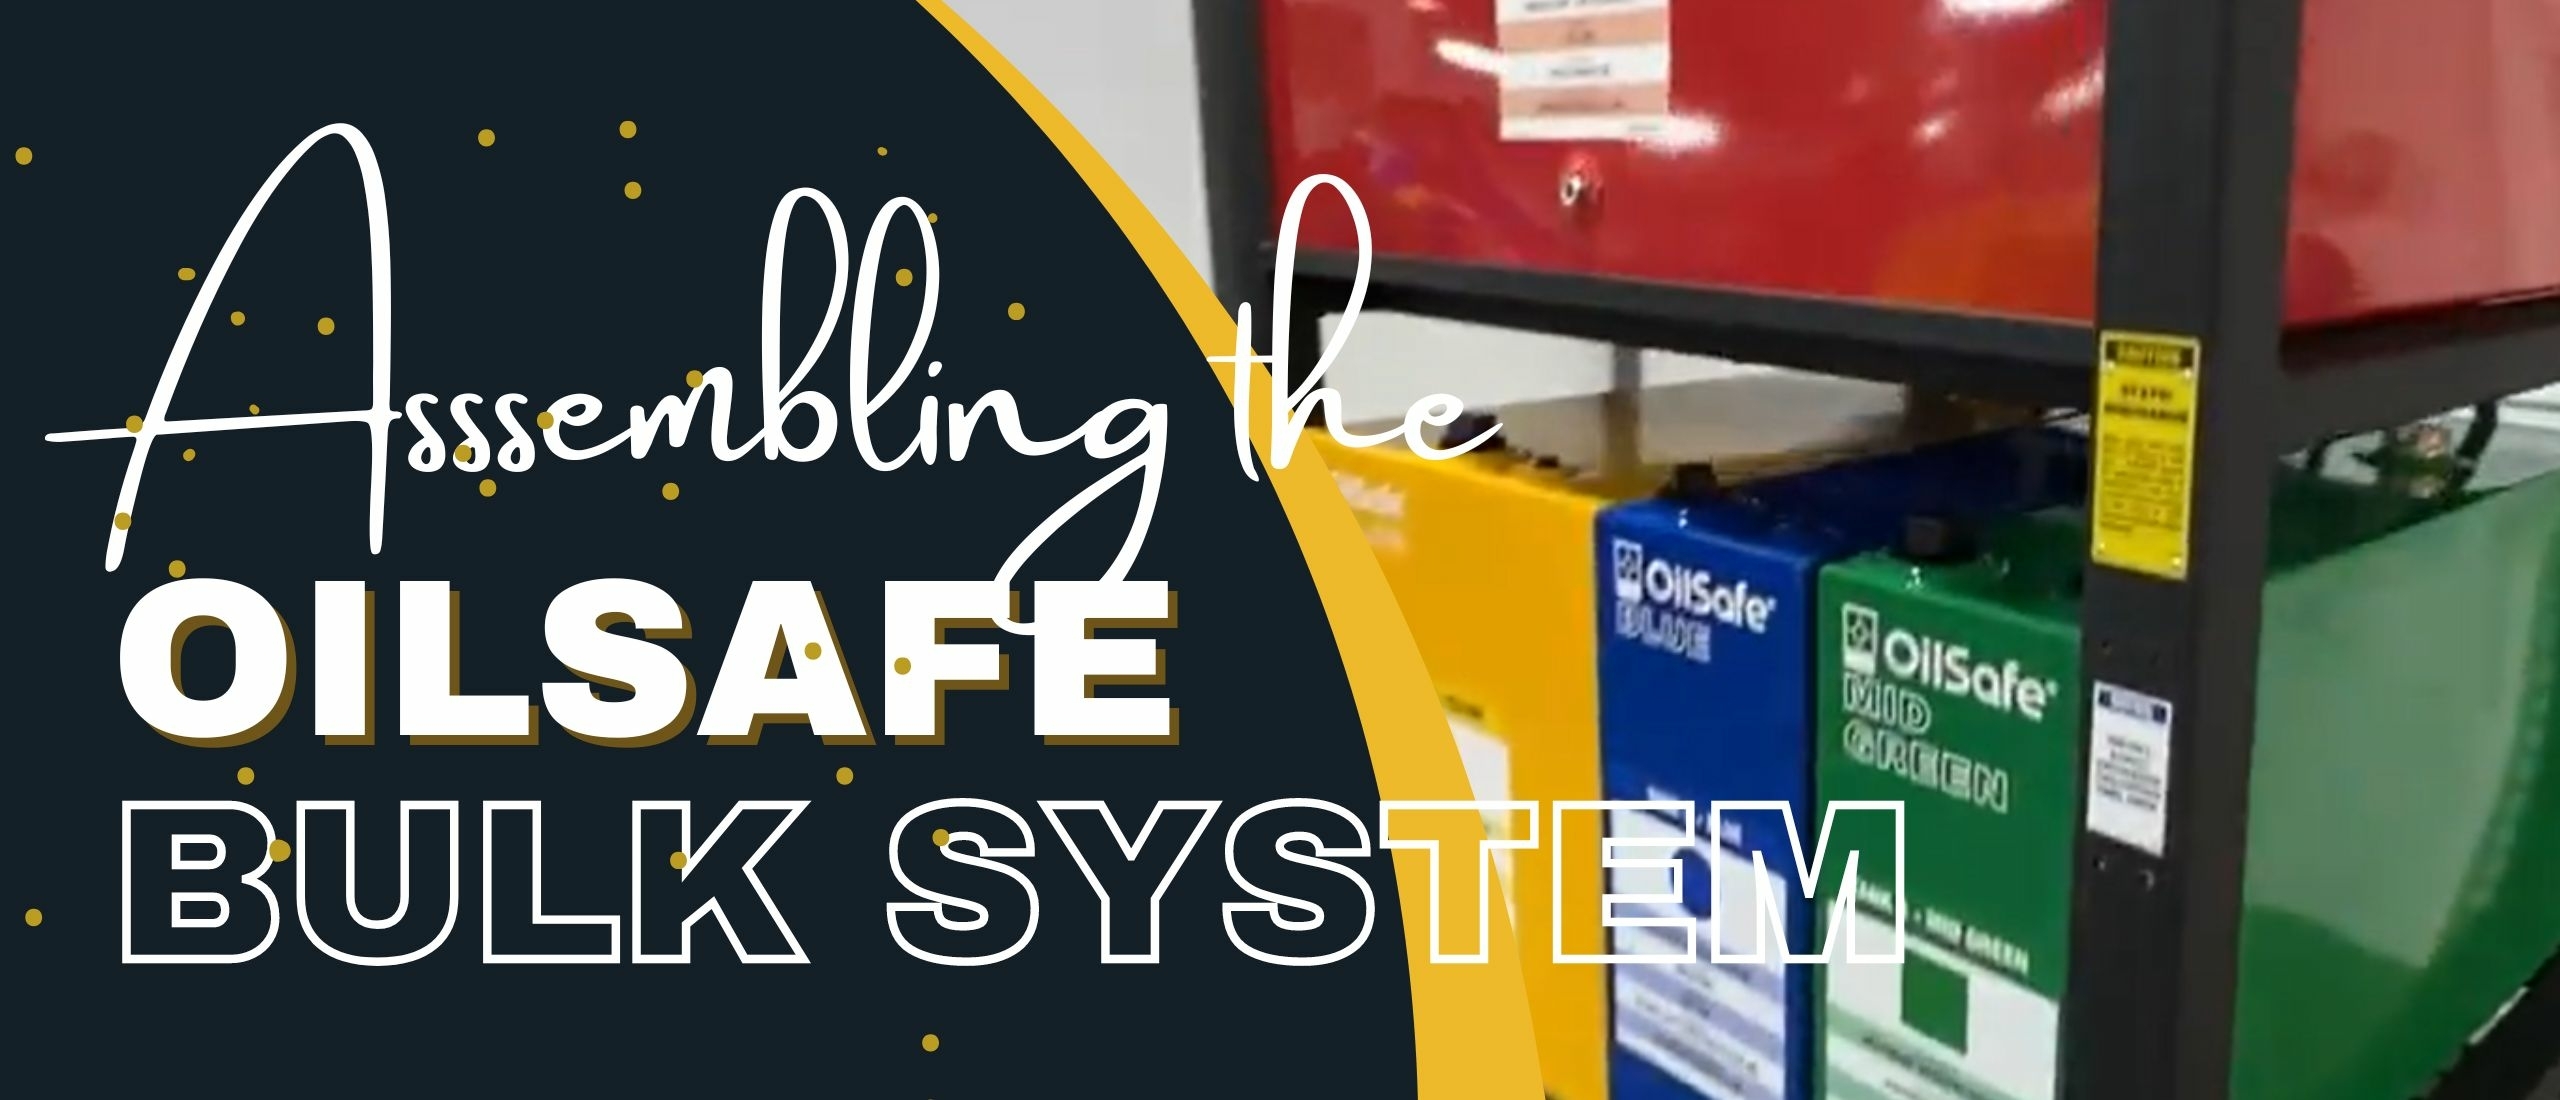 Assembling the OilSafe Bulk System with Ease